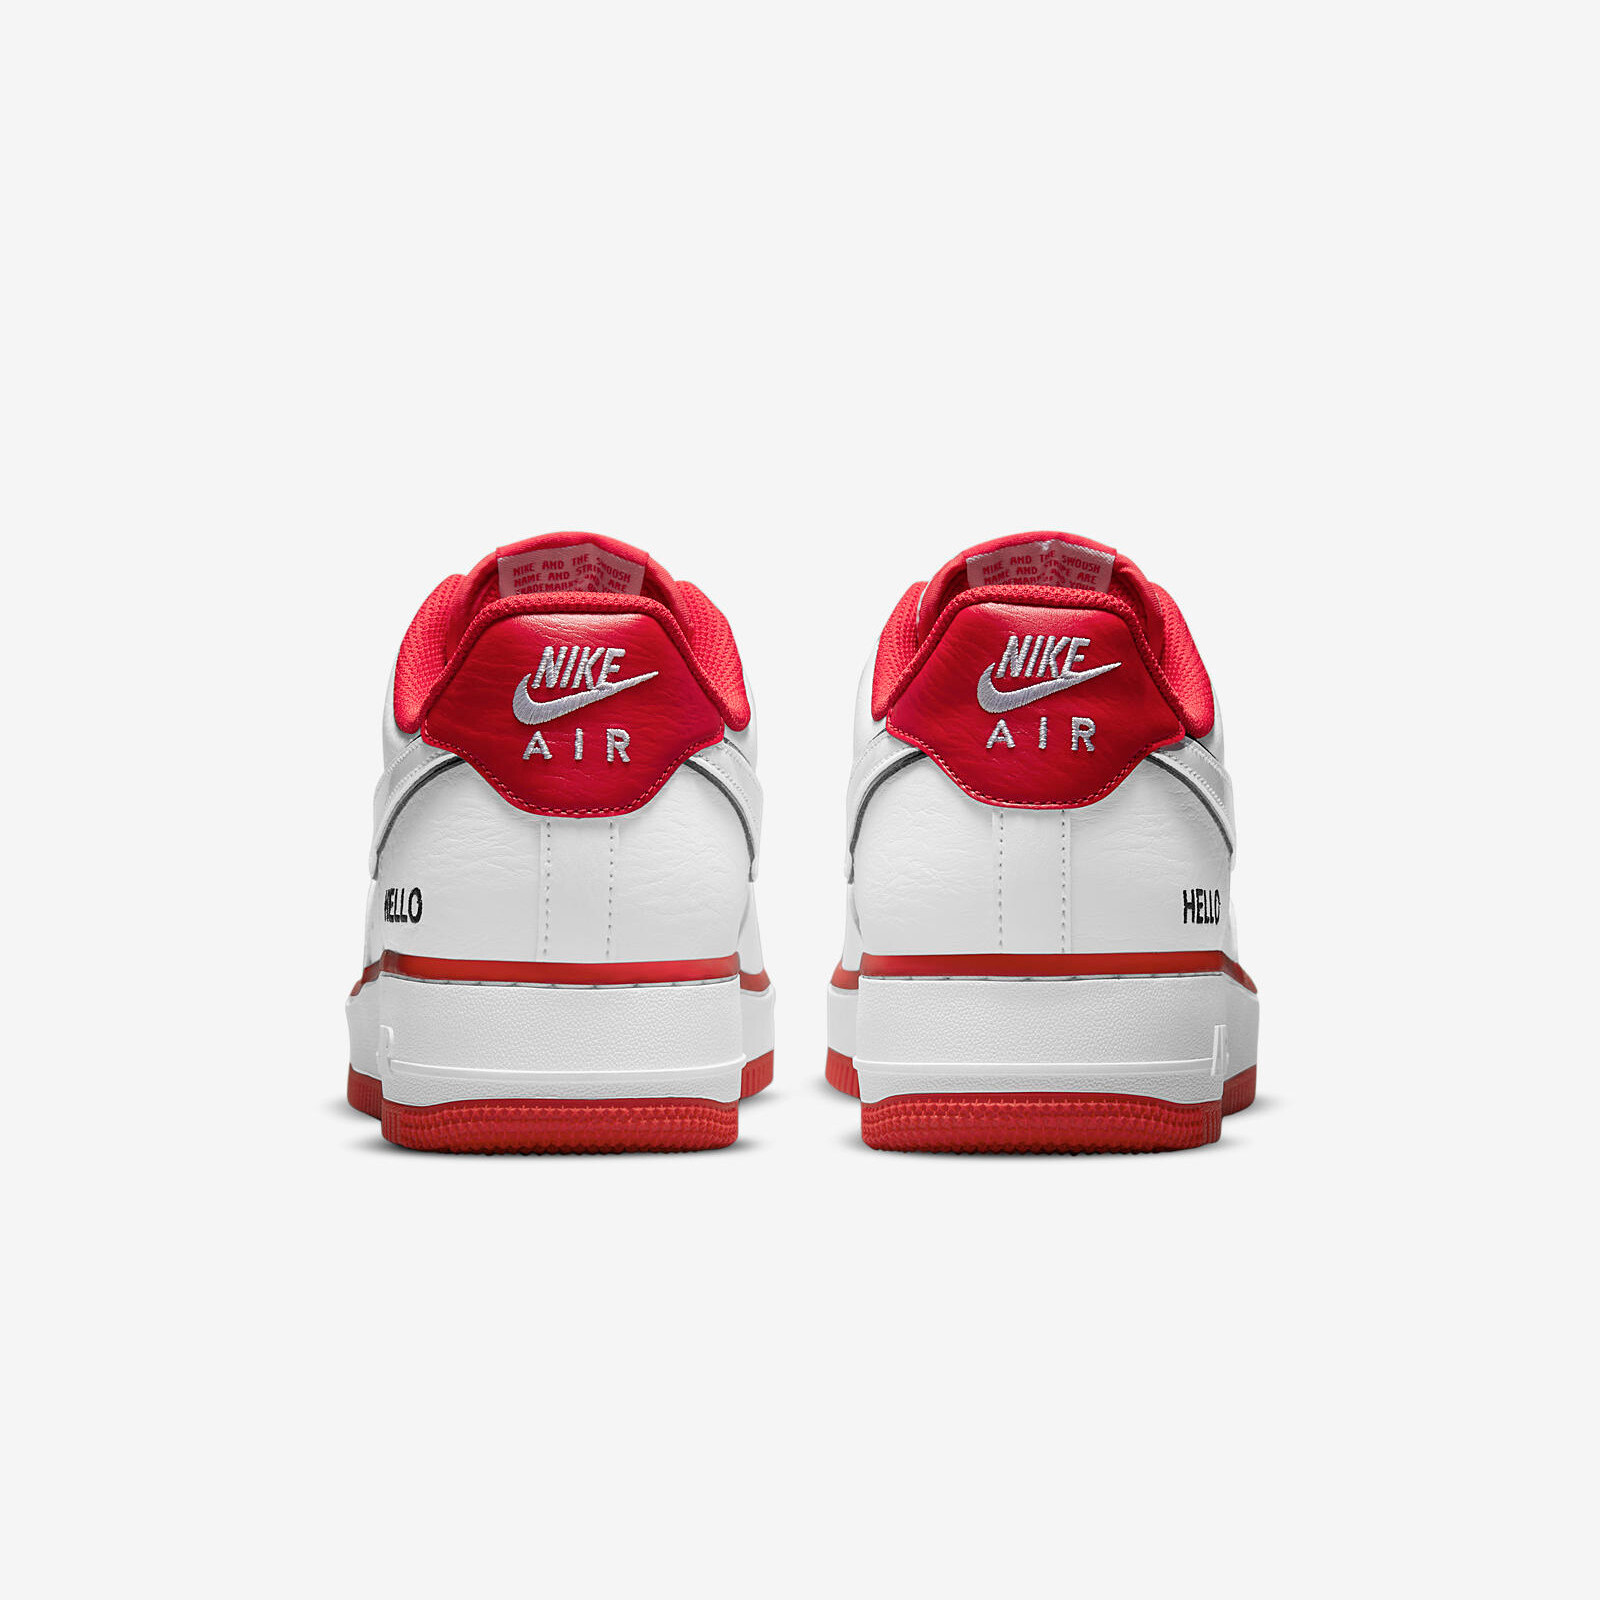 Nike Air Force 1 Hello
White / Red